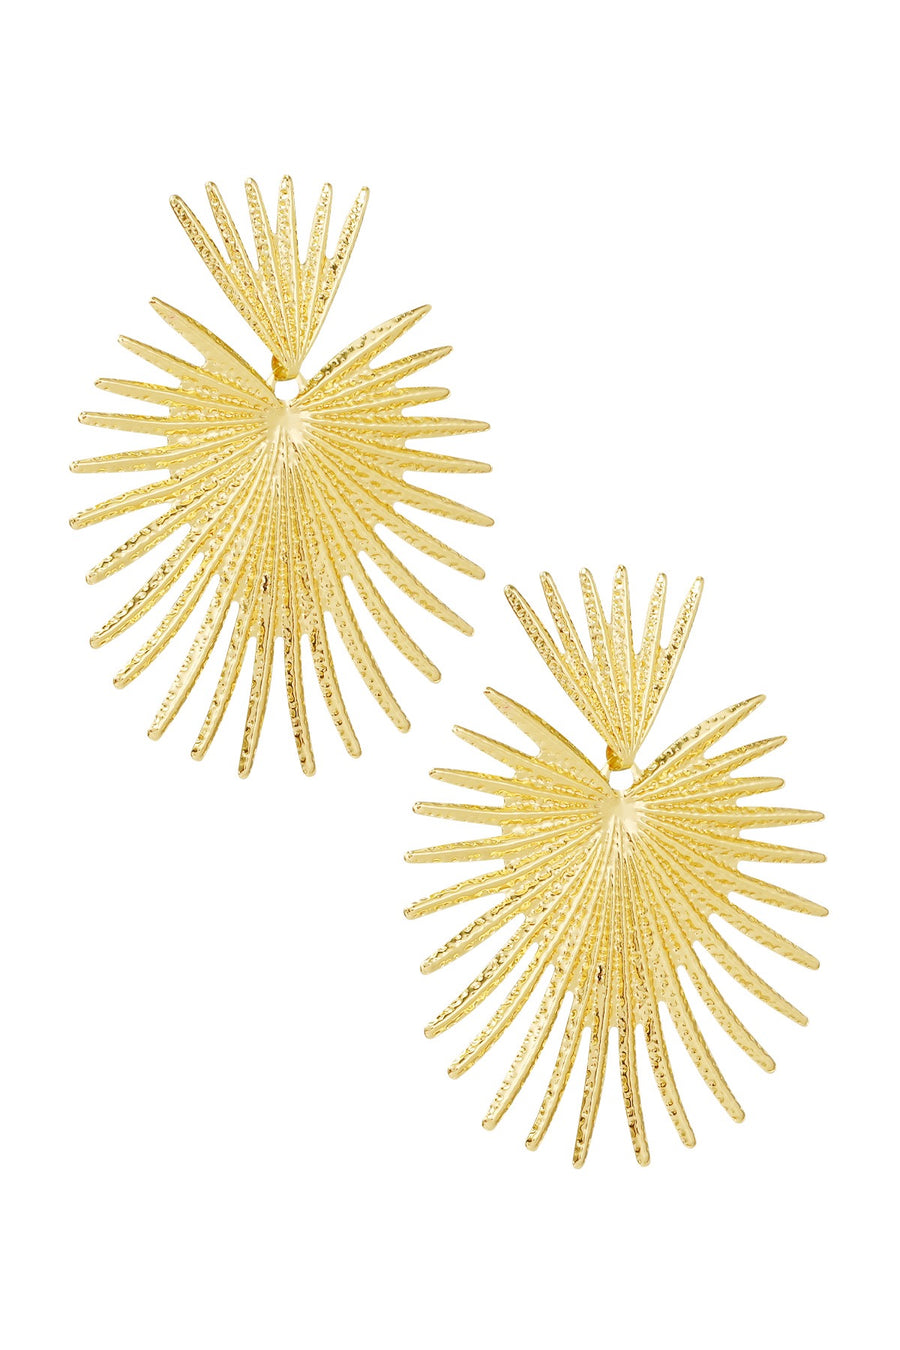 Radiant Statement Earrings- Gold & Silver Available